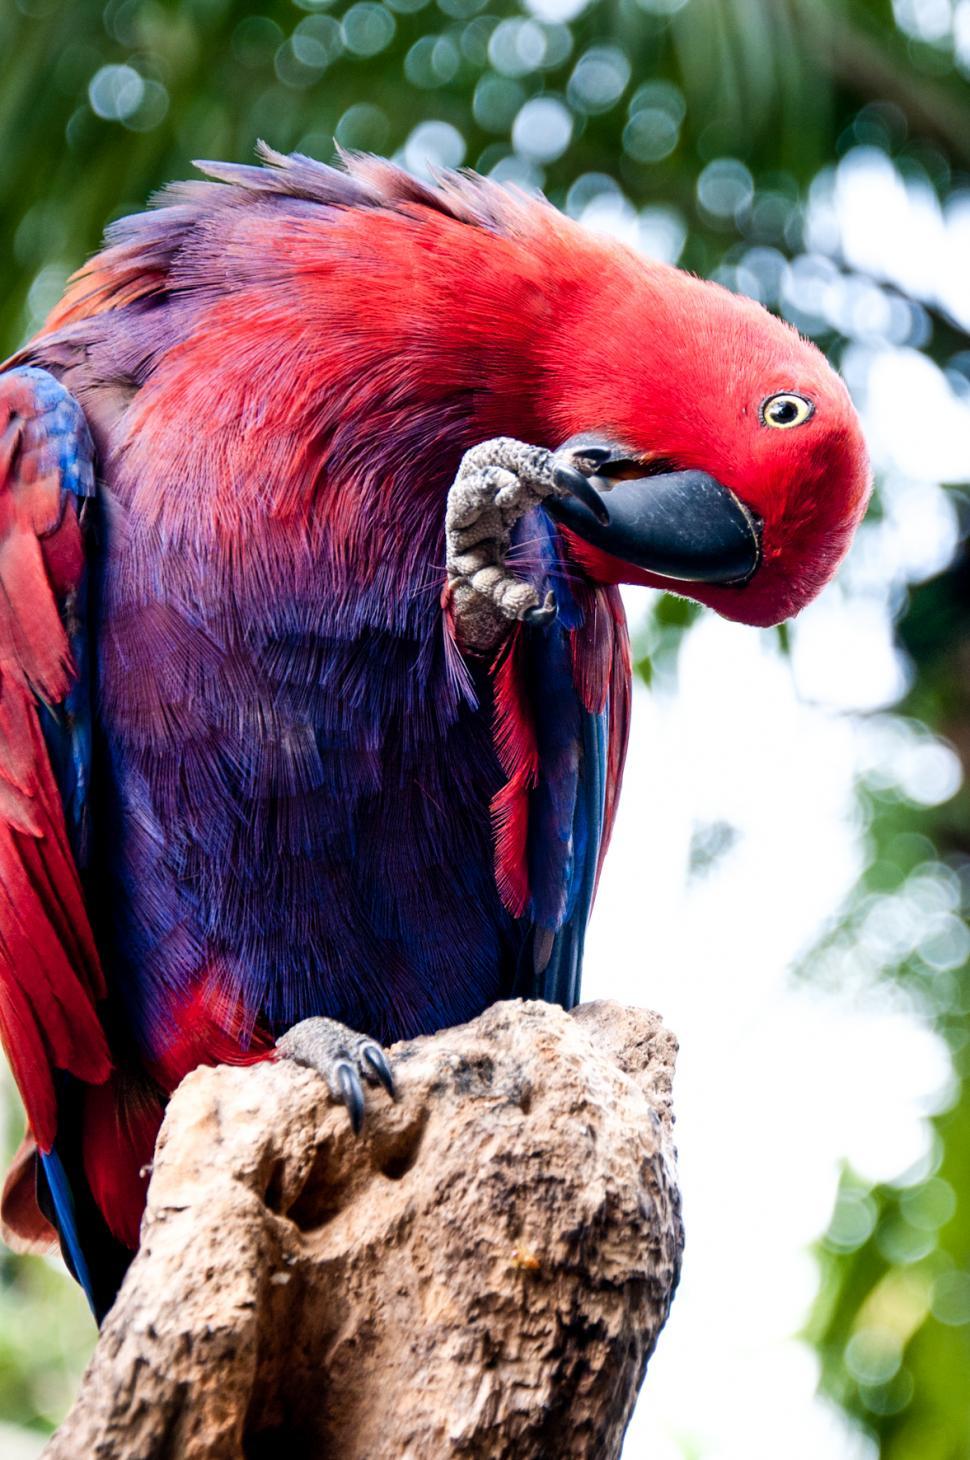 Free Image of Red Parrot bird 